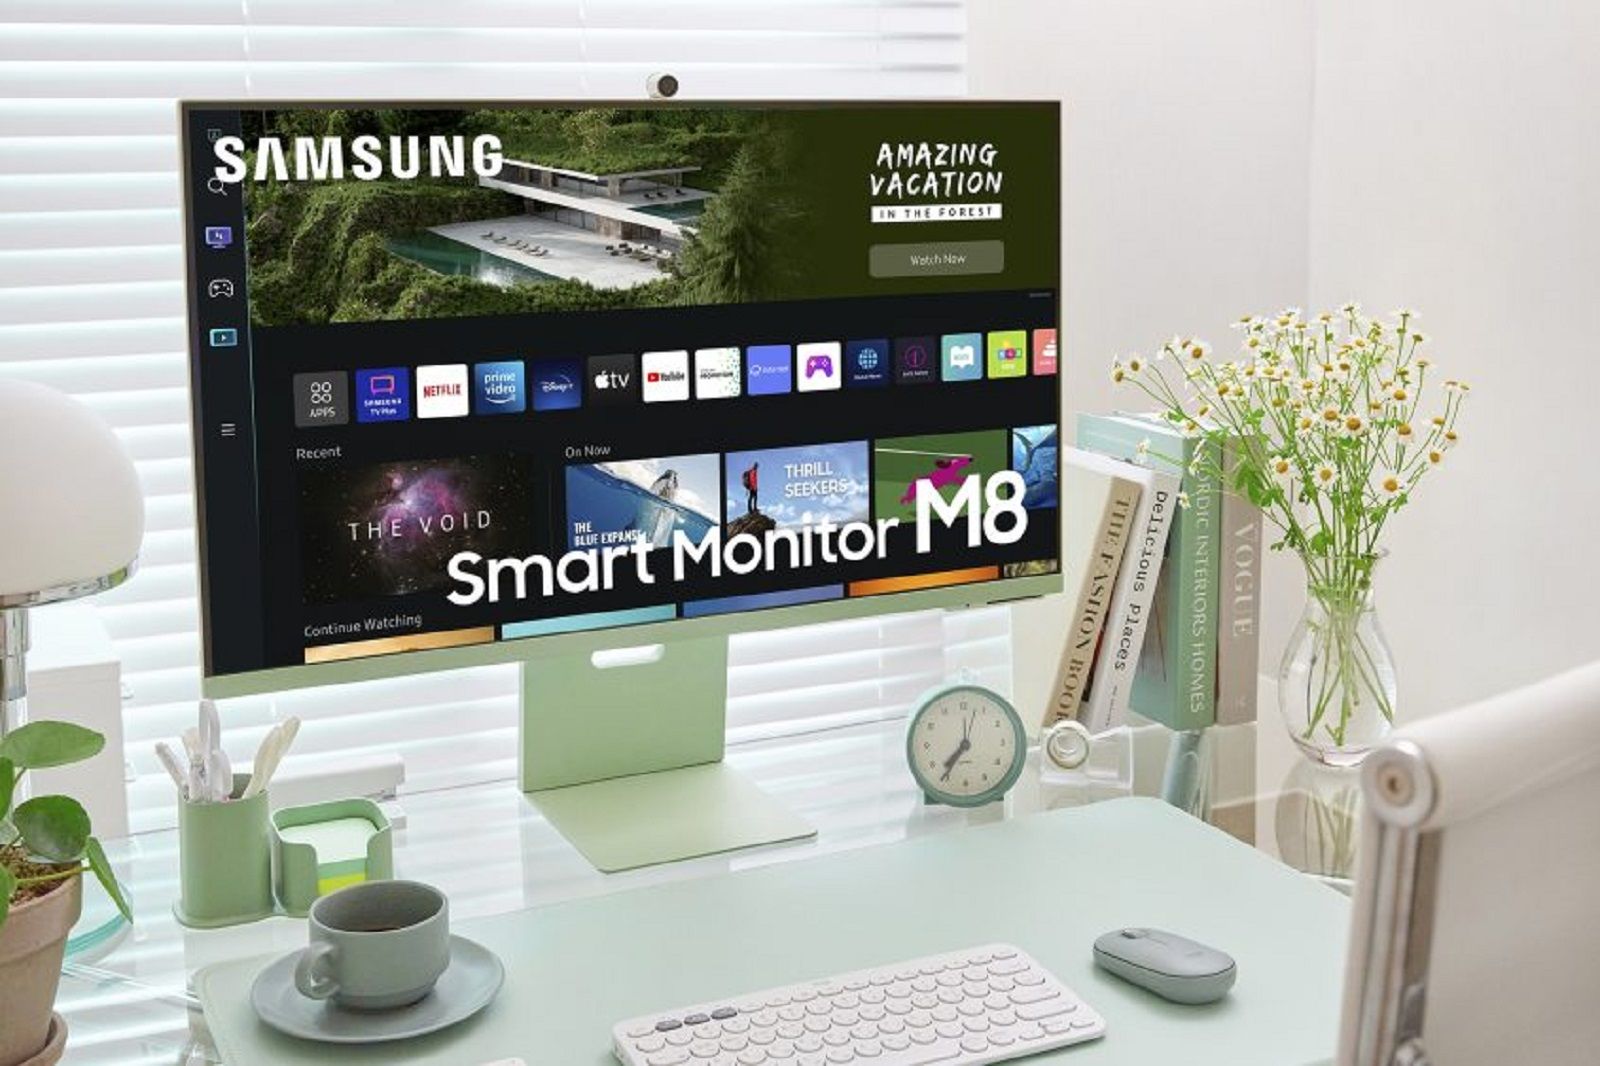 Samsung's Smart Monitor M8 makes it easier to access even more content and get more done photo 1